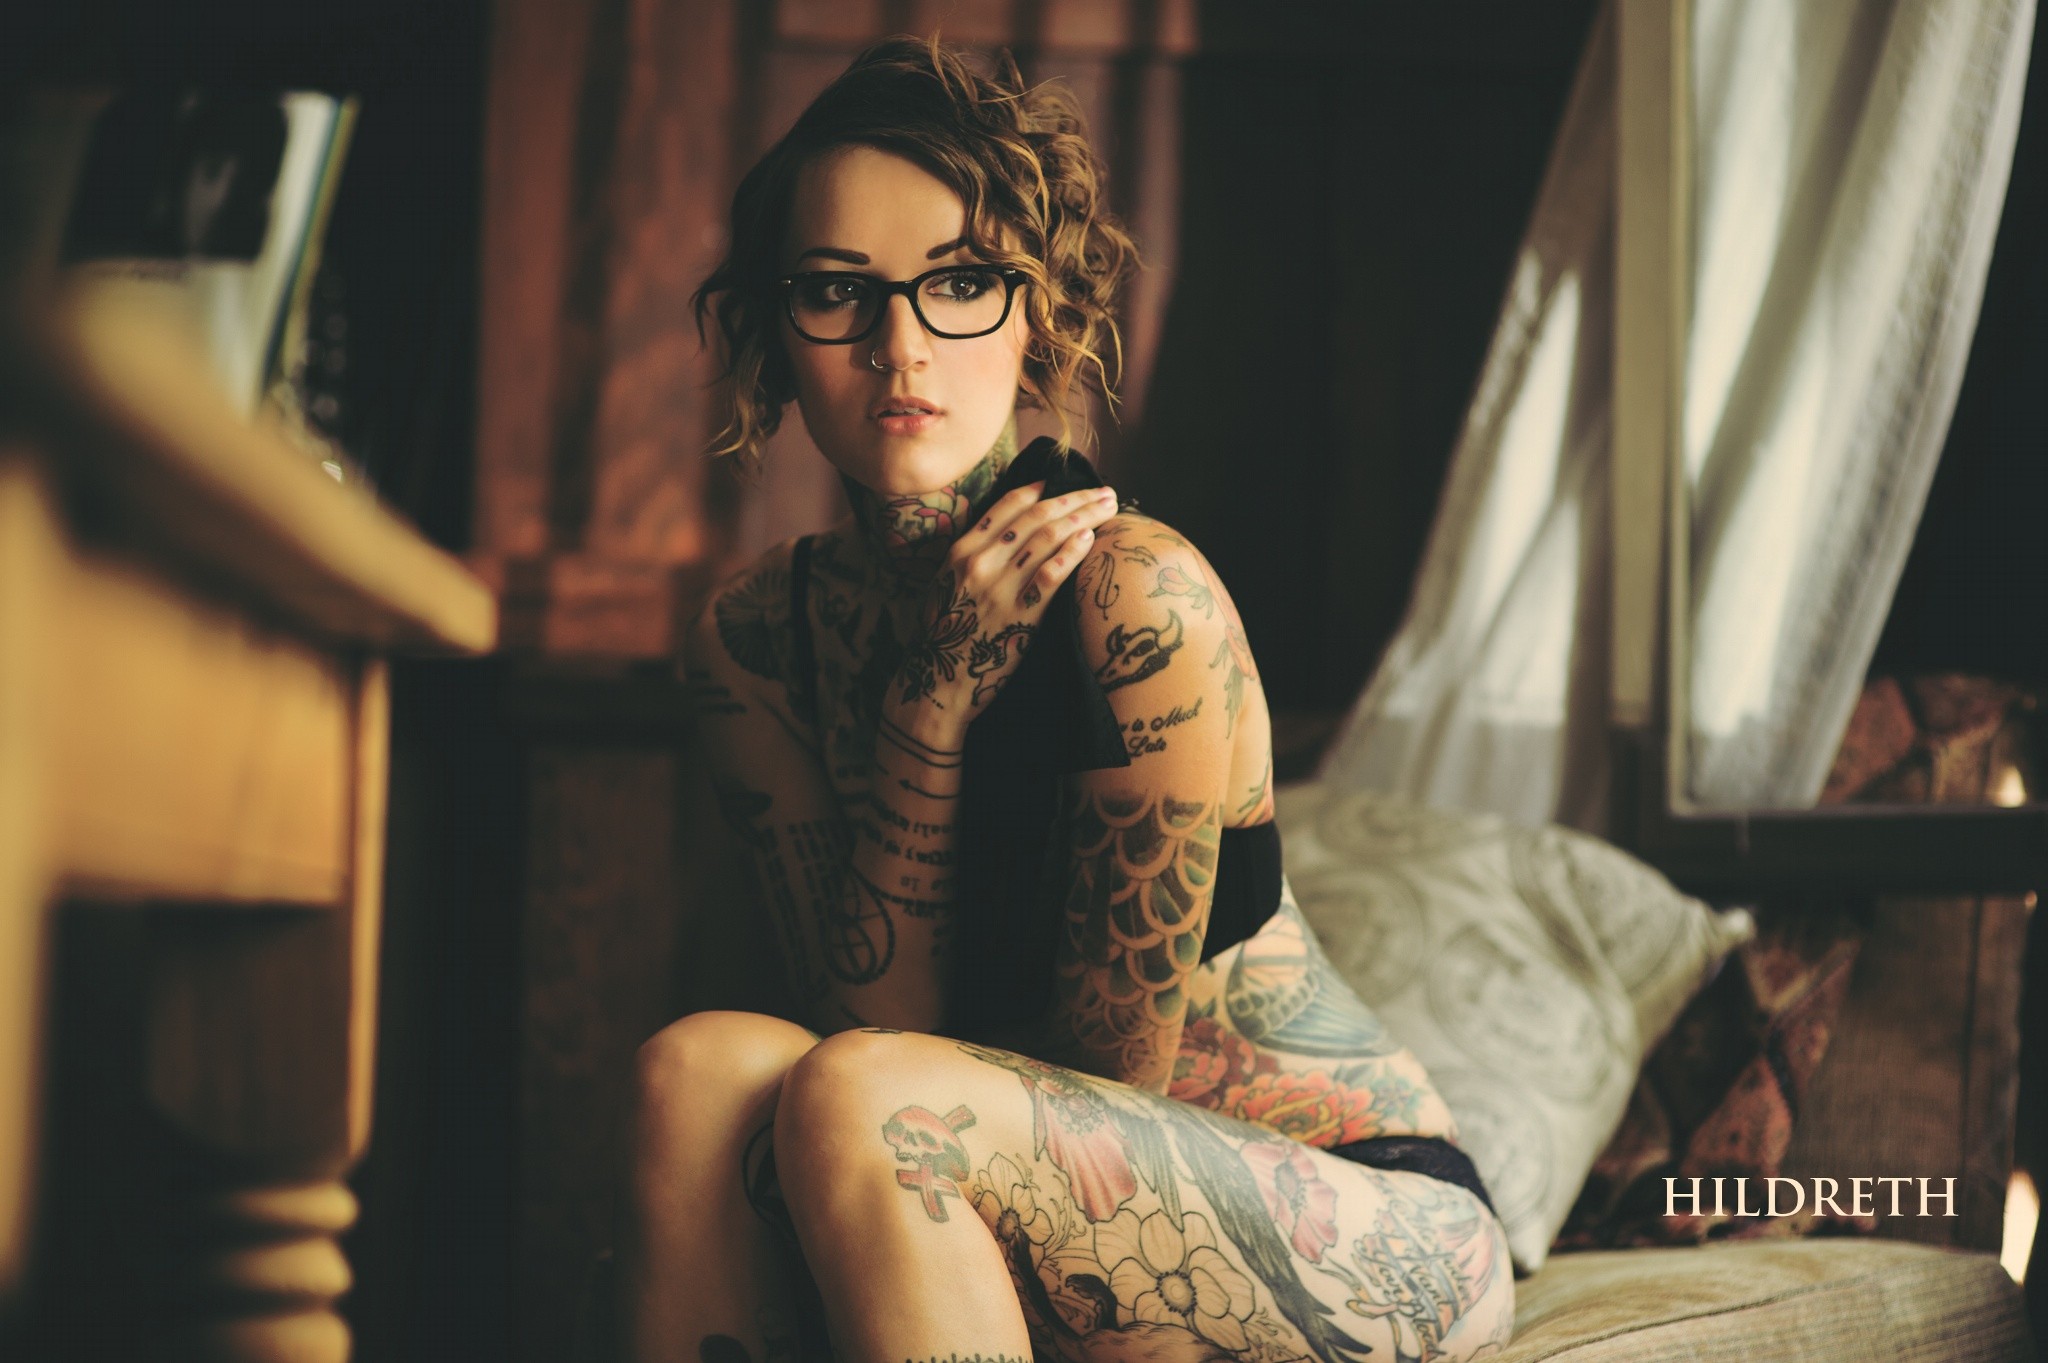 People 2048x1363 women glasses curly hair tattoo Charles Hildreth sitting women with glasses